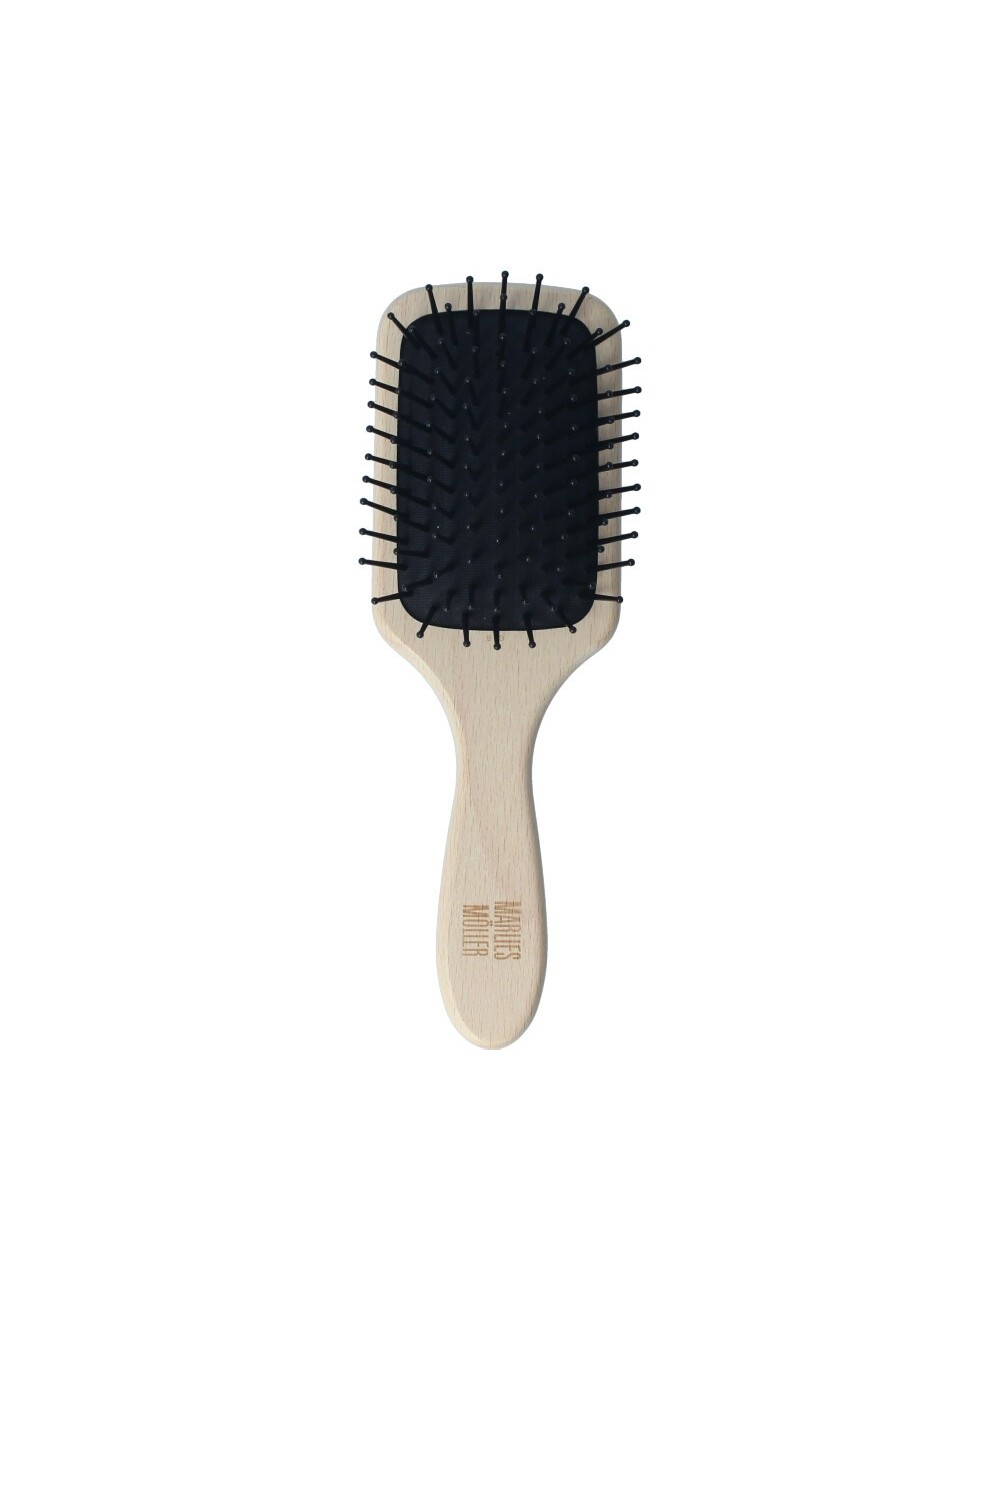 Marlies Moller Brushes & Combs Travel New Classic